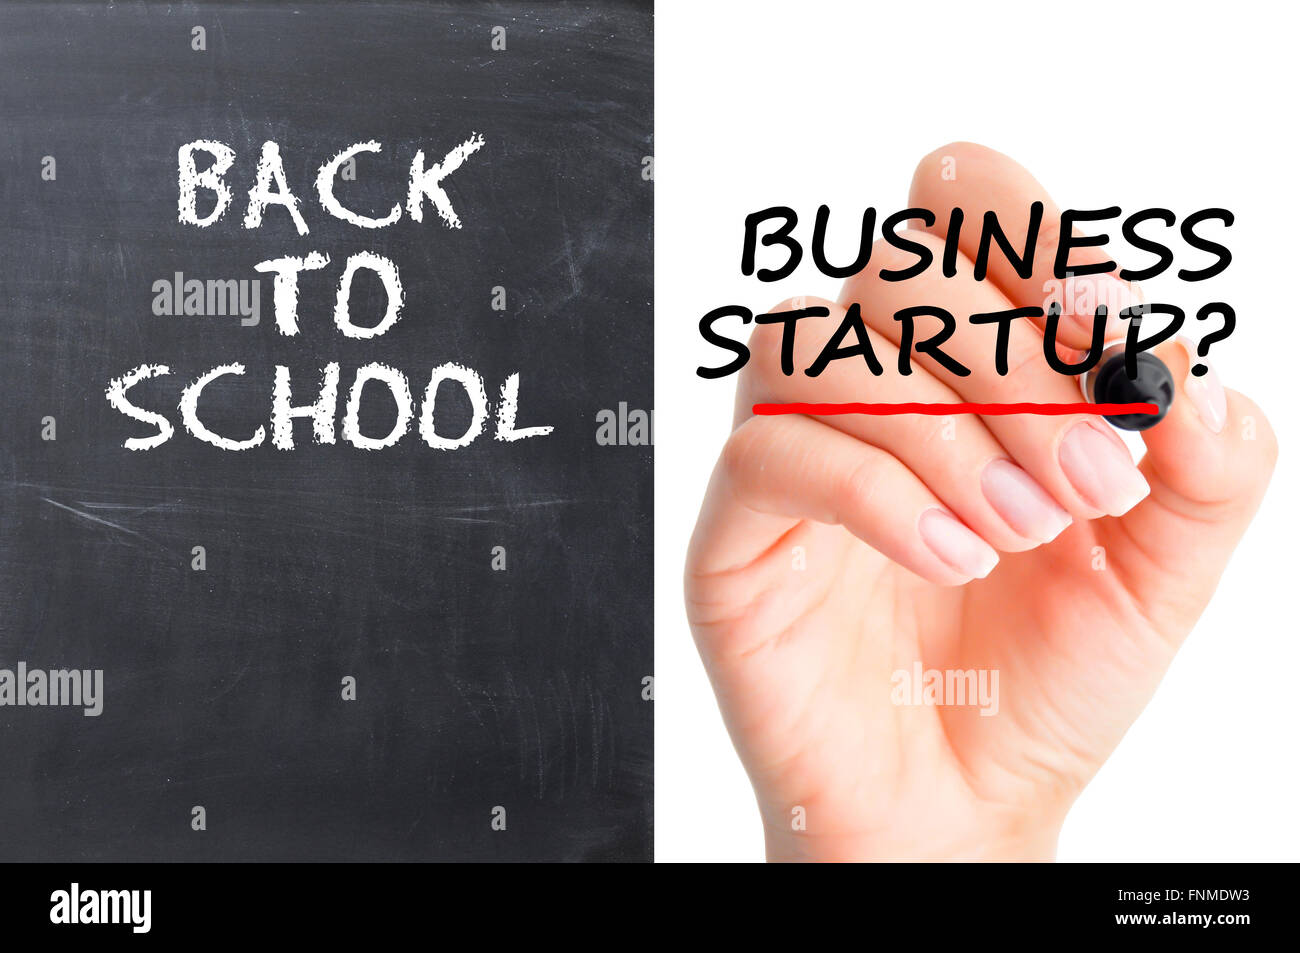 School or business startup dilemma Stock Photo